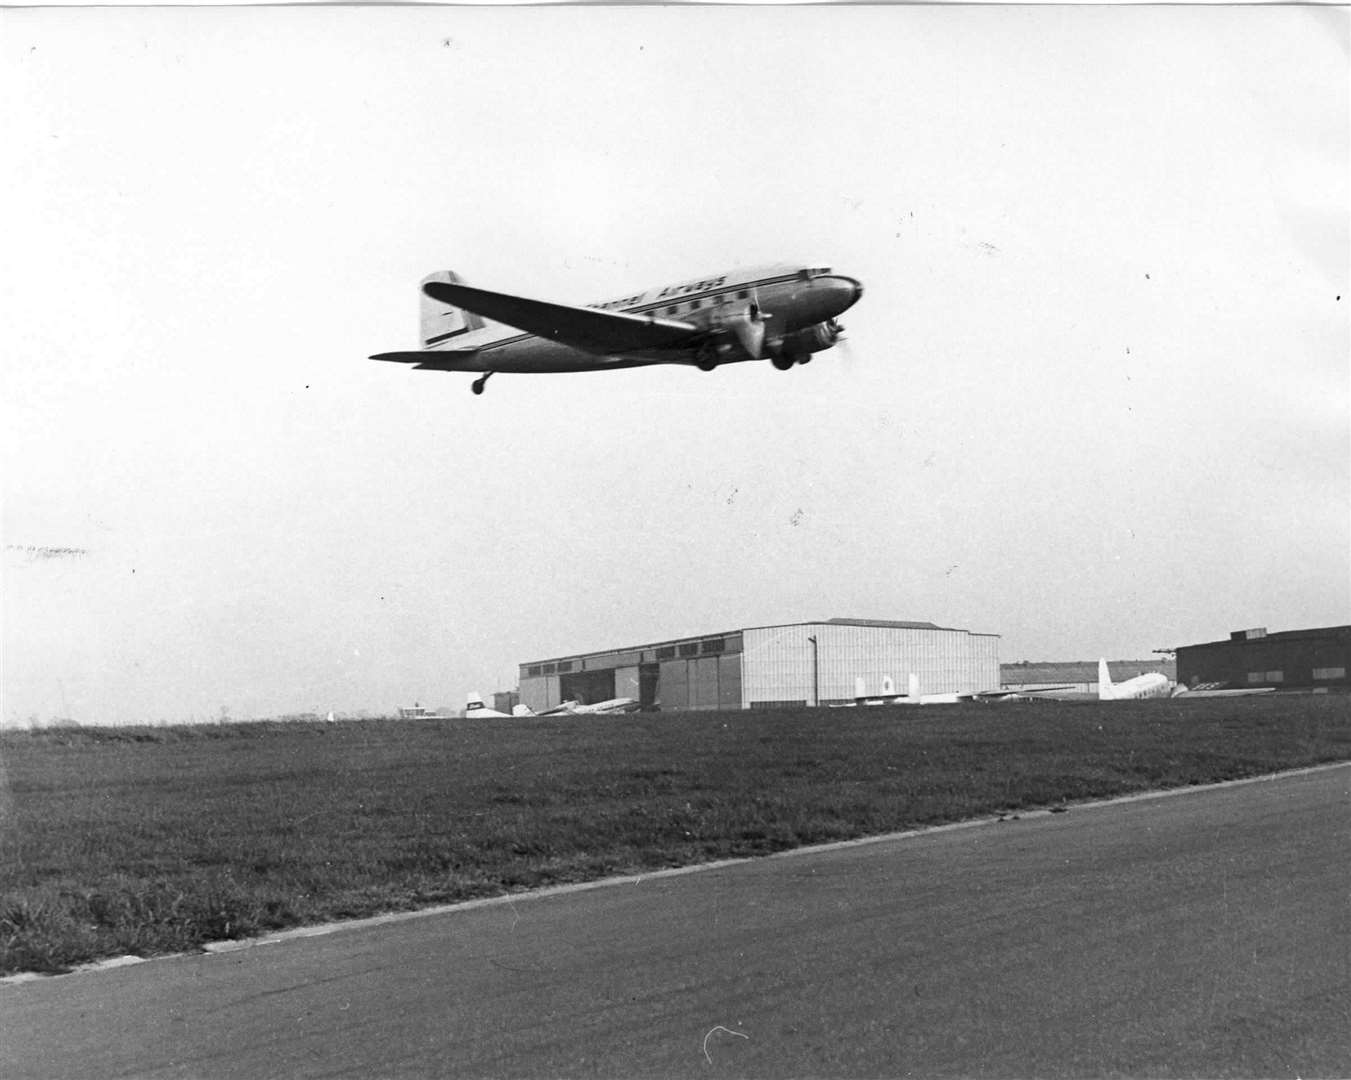 A plane takes off in 1964 form Lydd airport